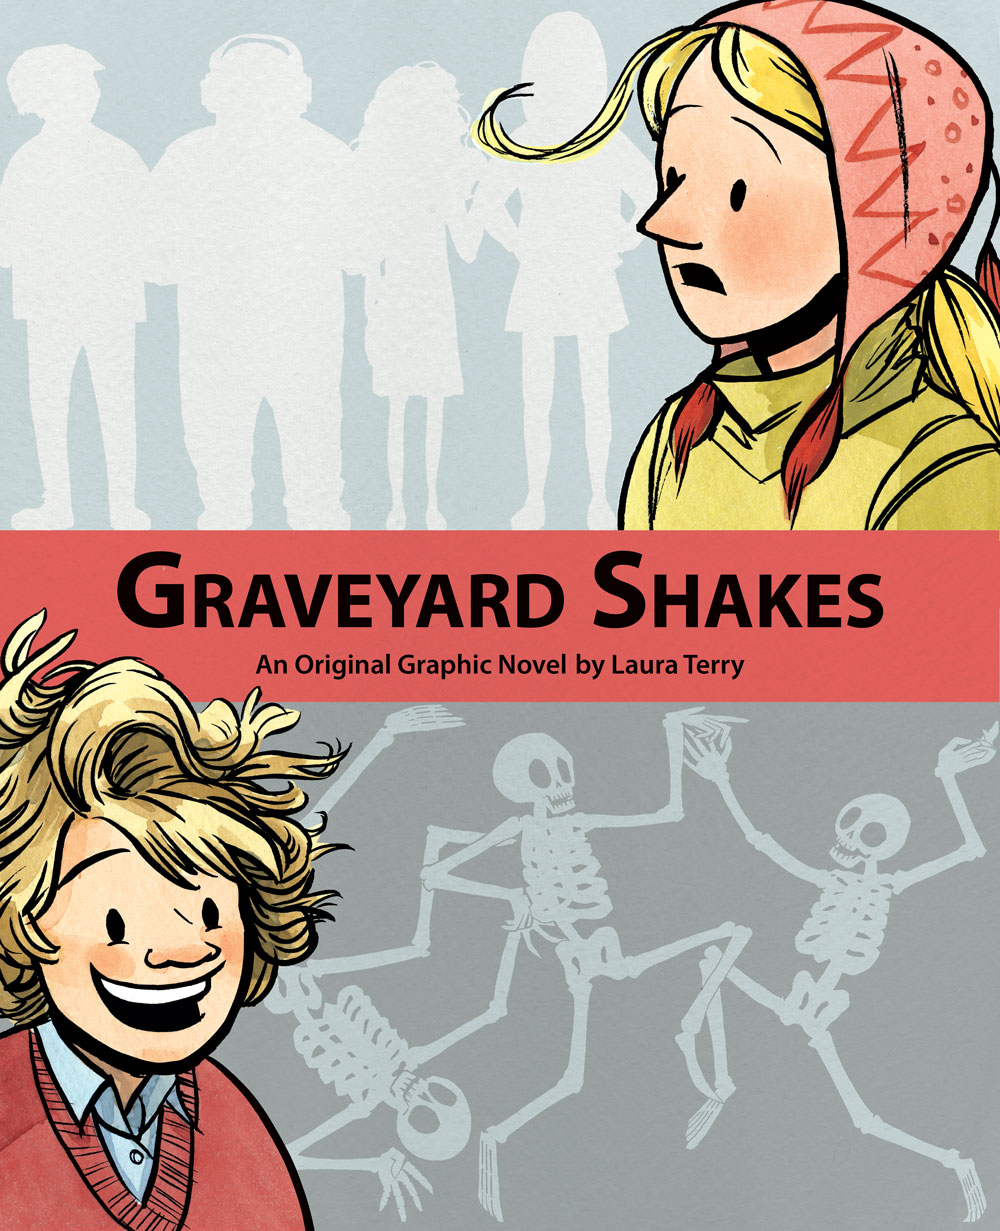 Graveyard Shakes by Laura Terry